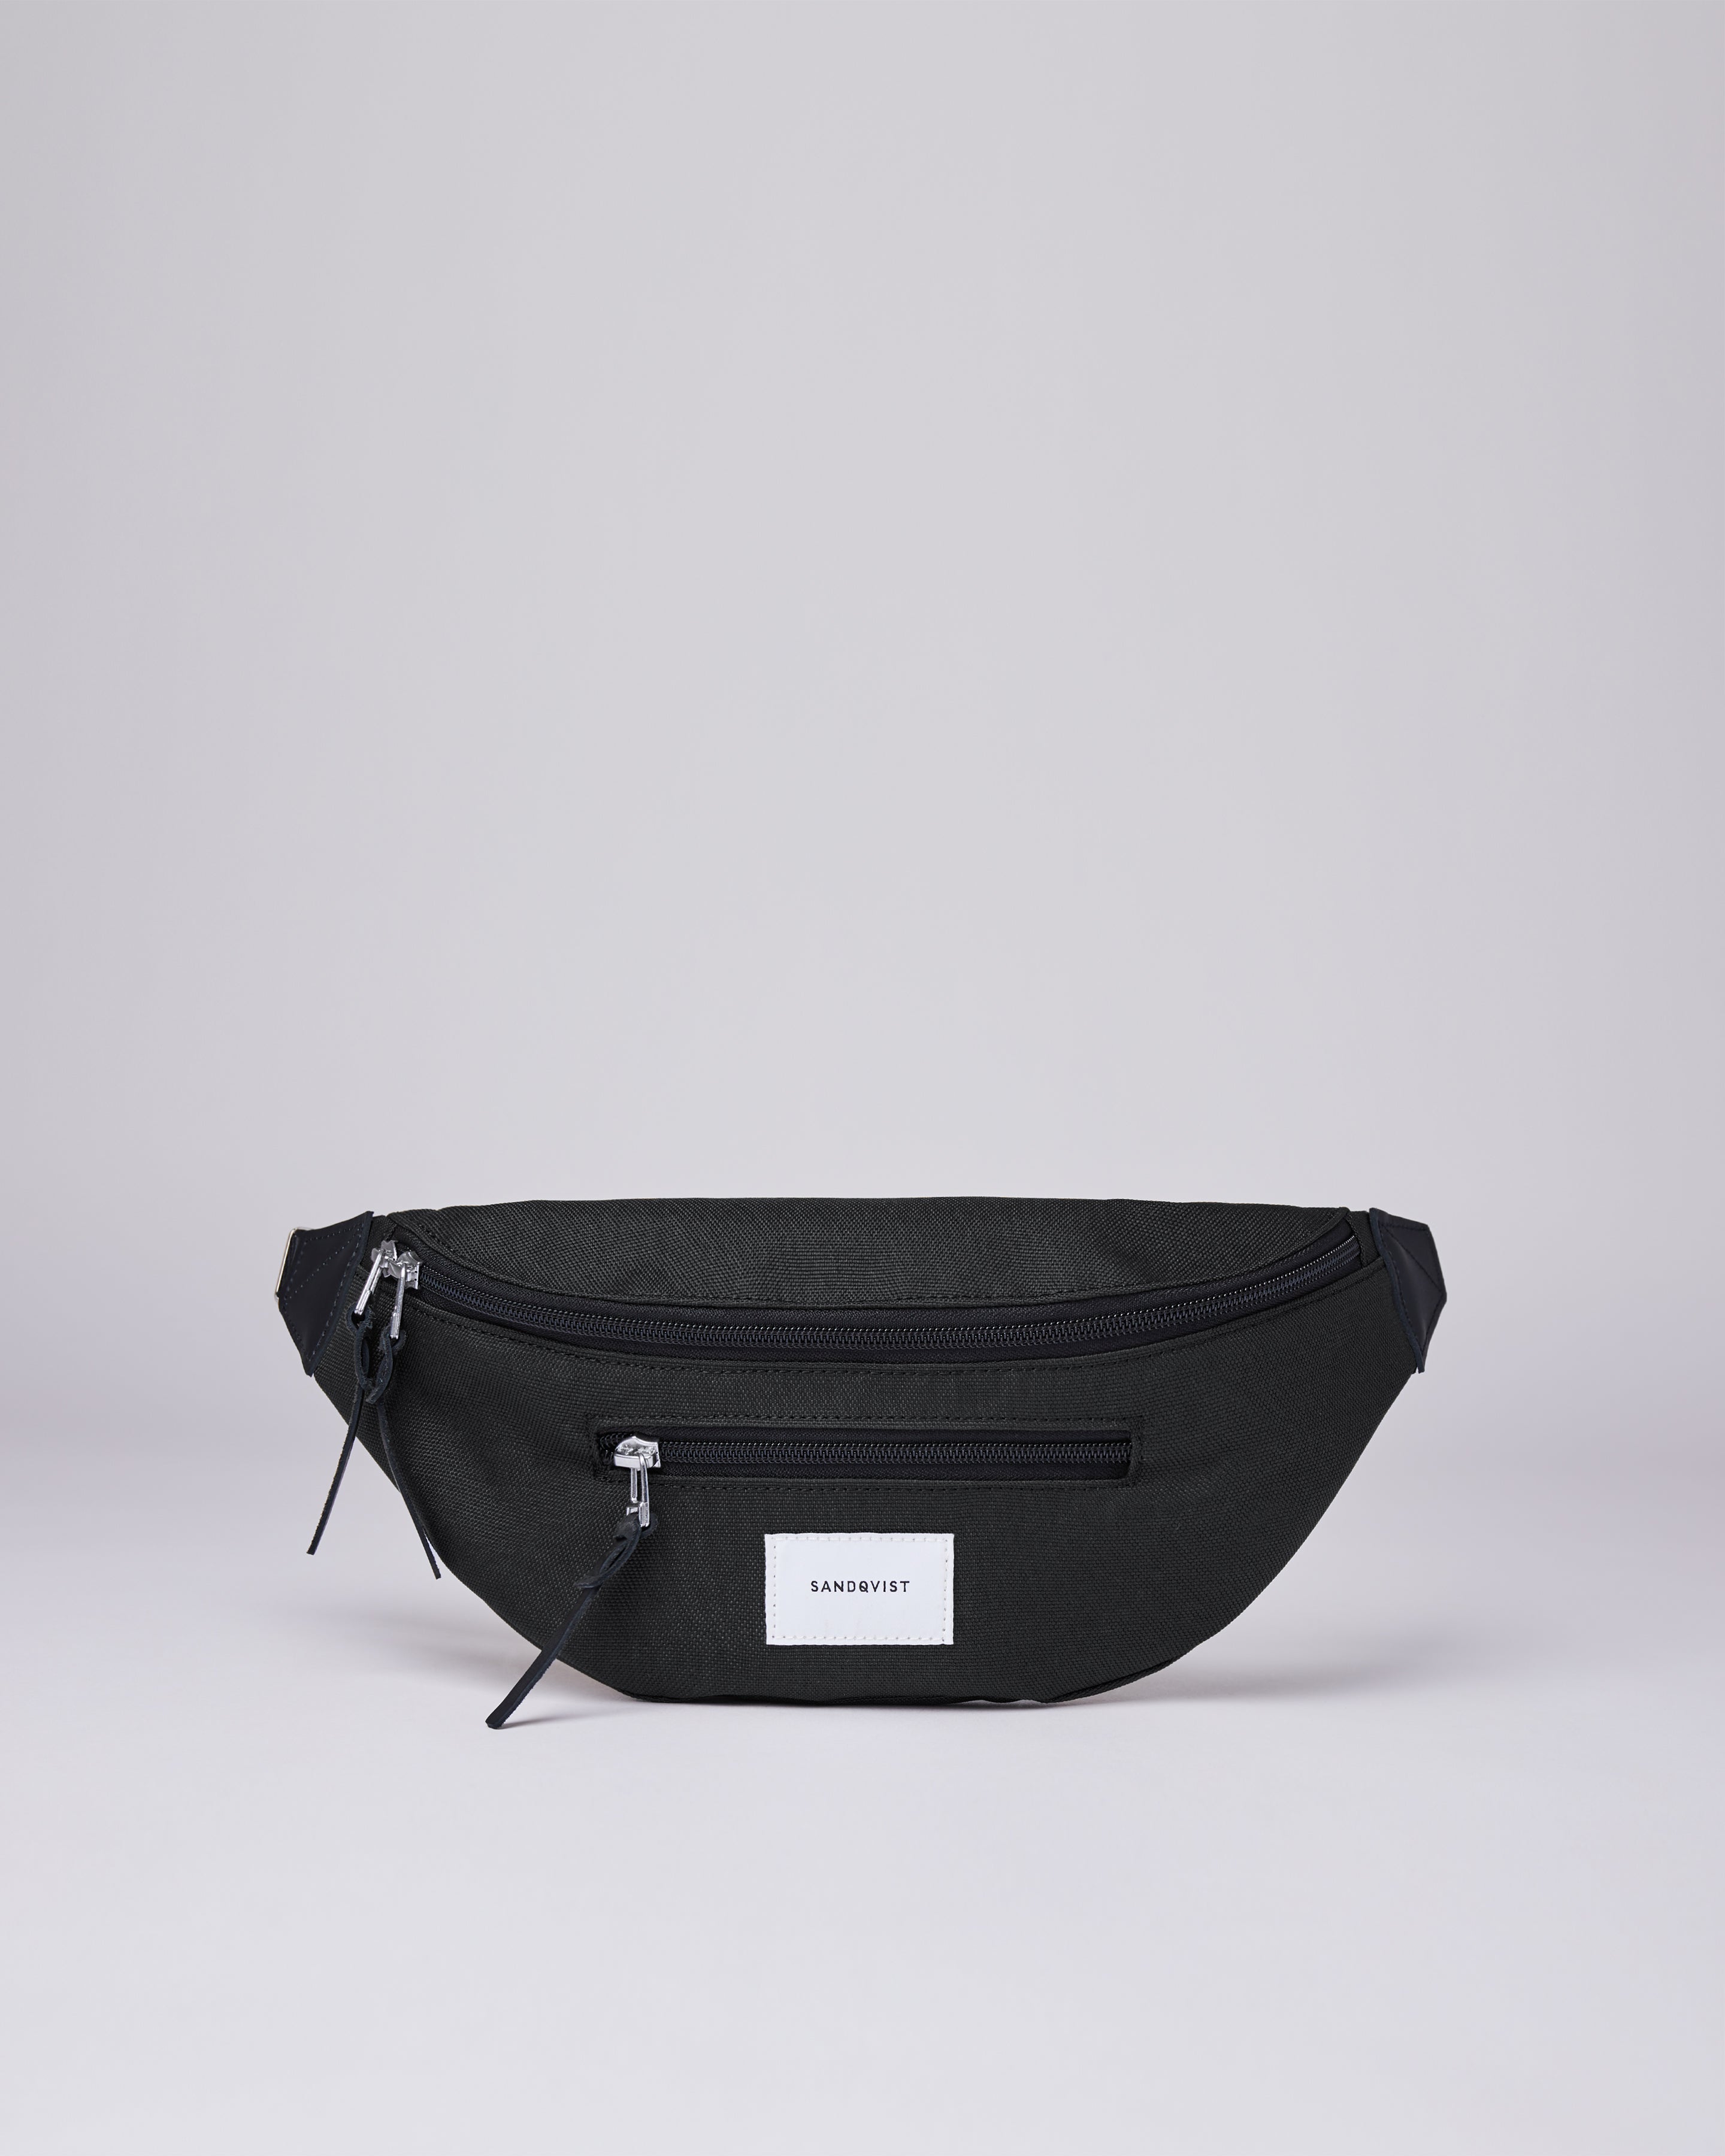 Sandqvist Aste Crossbody Bag in Black SQA1036 | Shop from eightywingold an official brand partner for Sandqvist Canada and US.